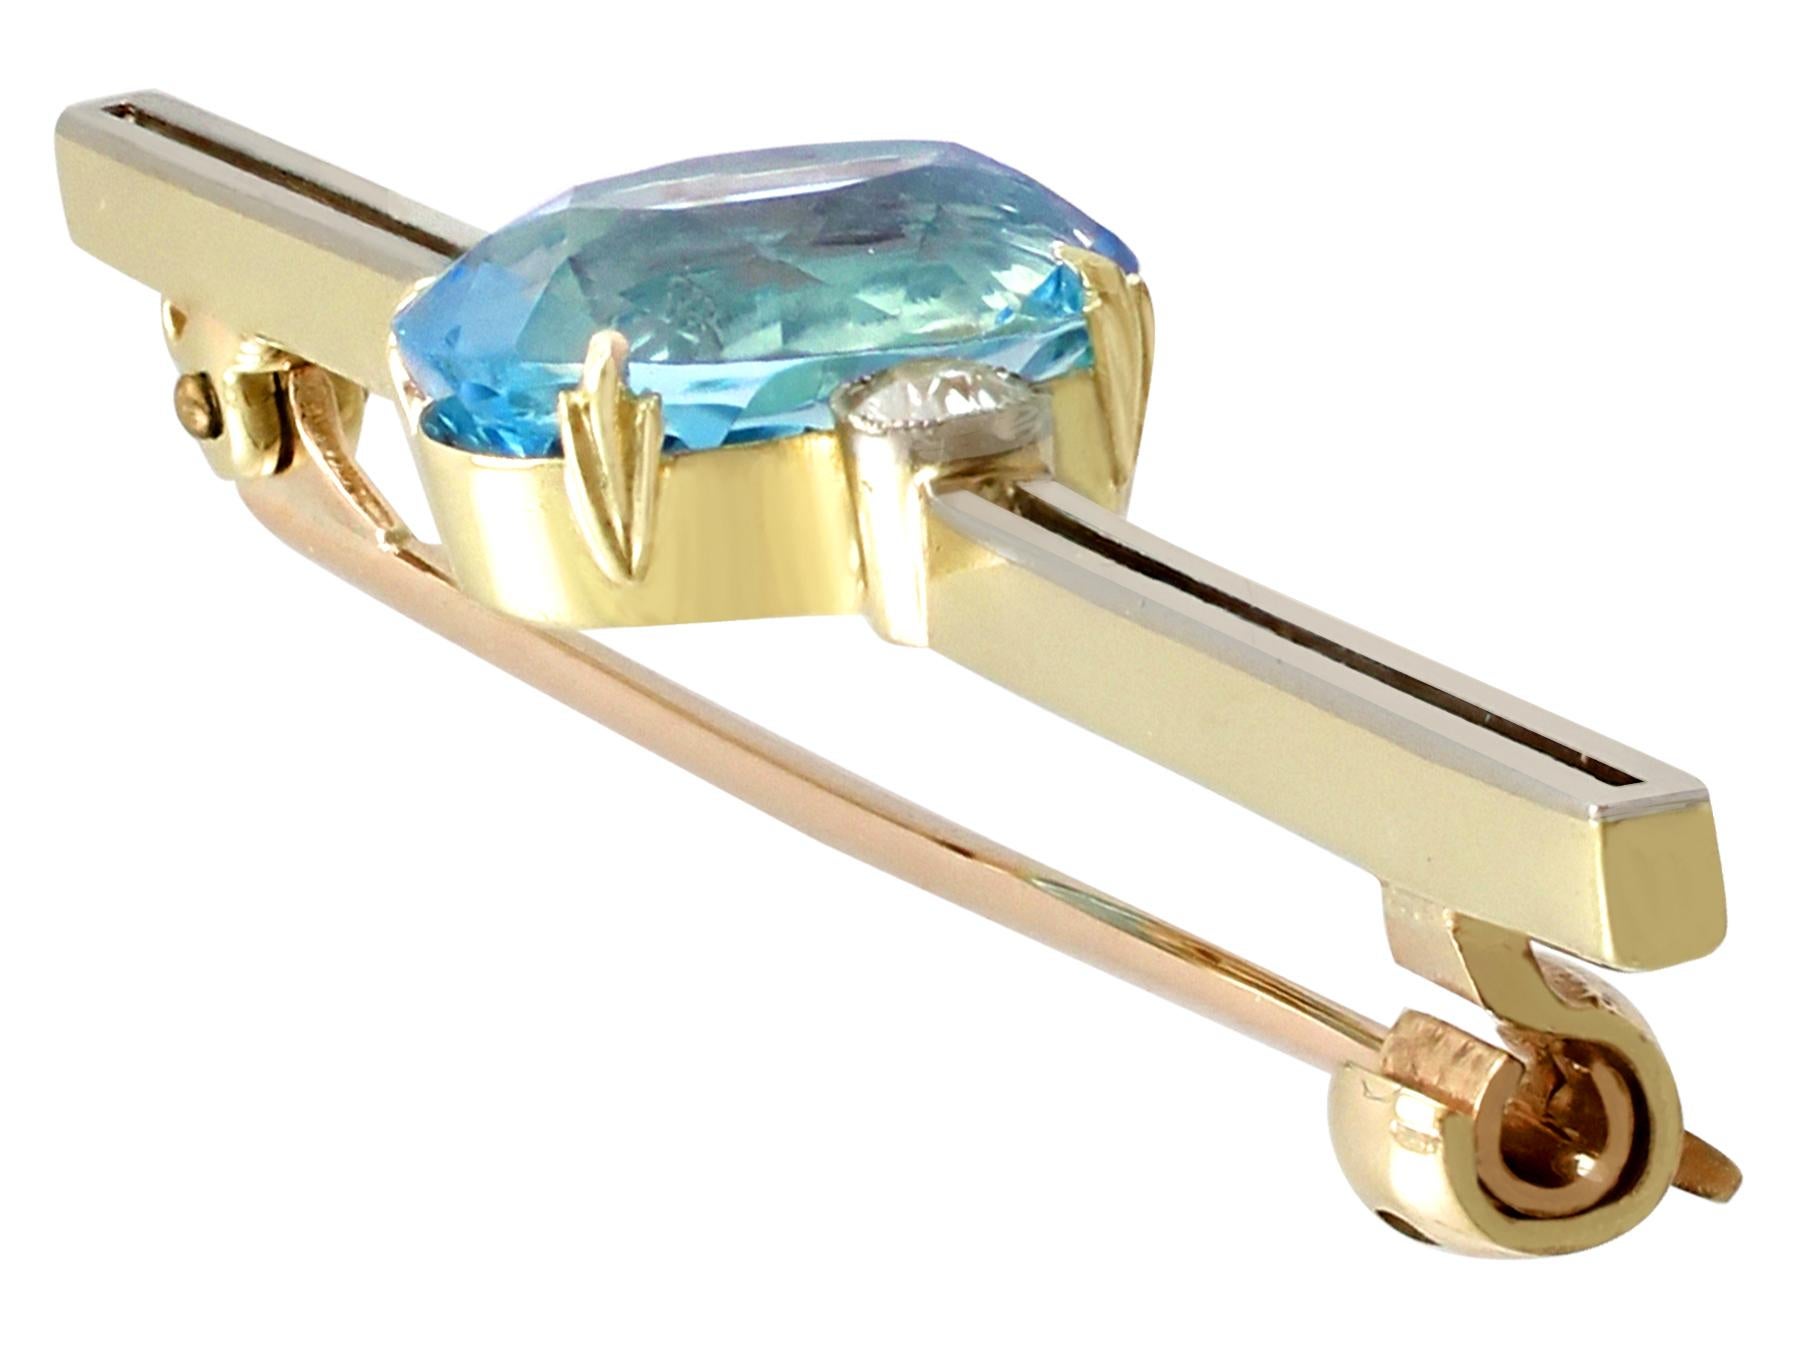 An impressive antique 1920s 2.27 carat aquamarine and 0.08 carat diamond, 12 karat yellow gold and platinum set bar brooch; part of our diverse antique jewelry collections.

This fine and impressive antique brooch has been crafted in 12k yellow gold